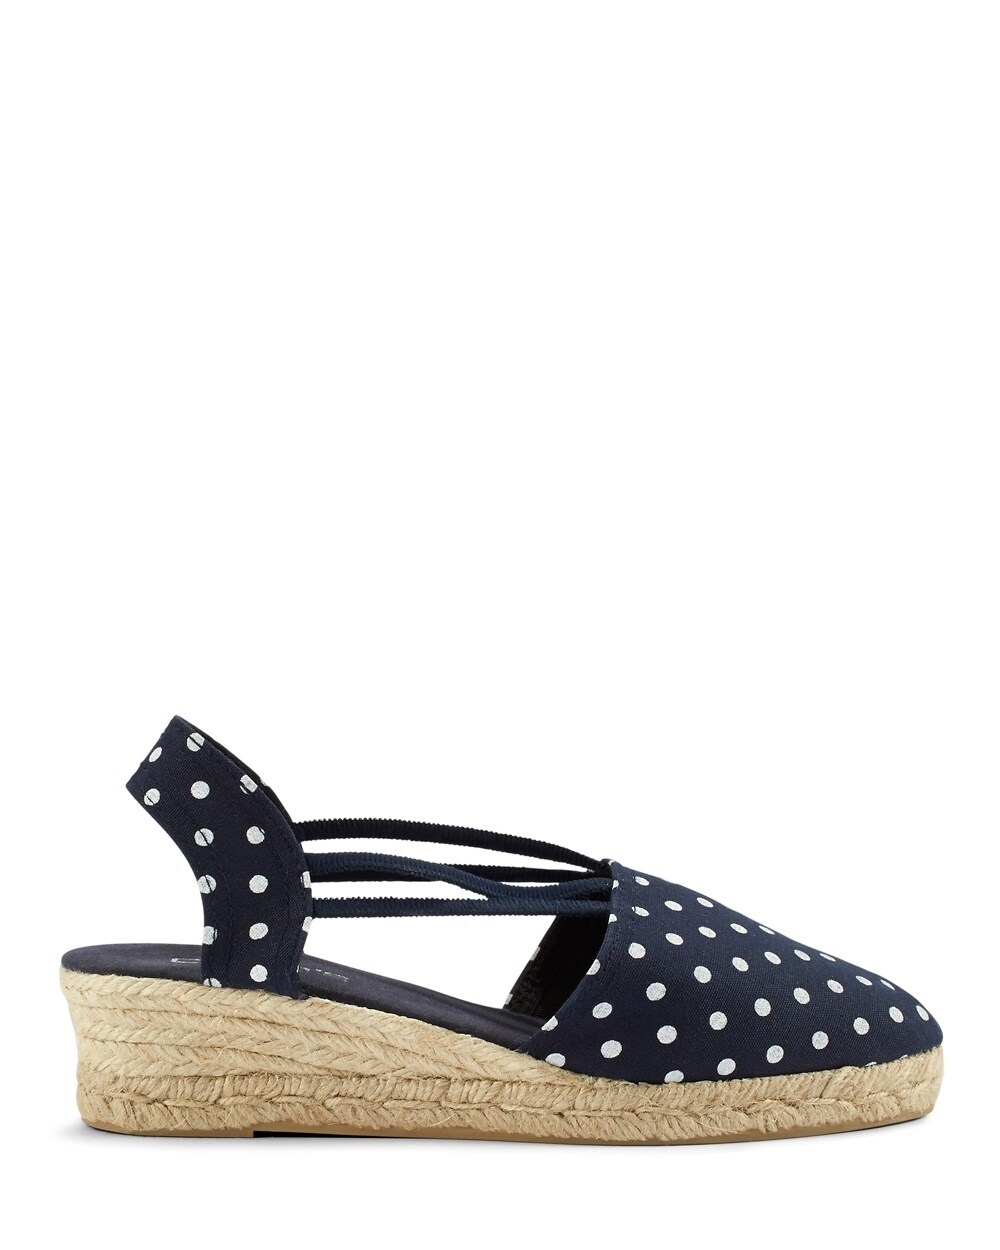 Dot Blue and White Espadrille Sandals